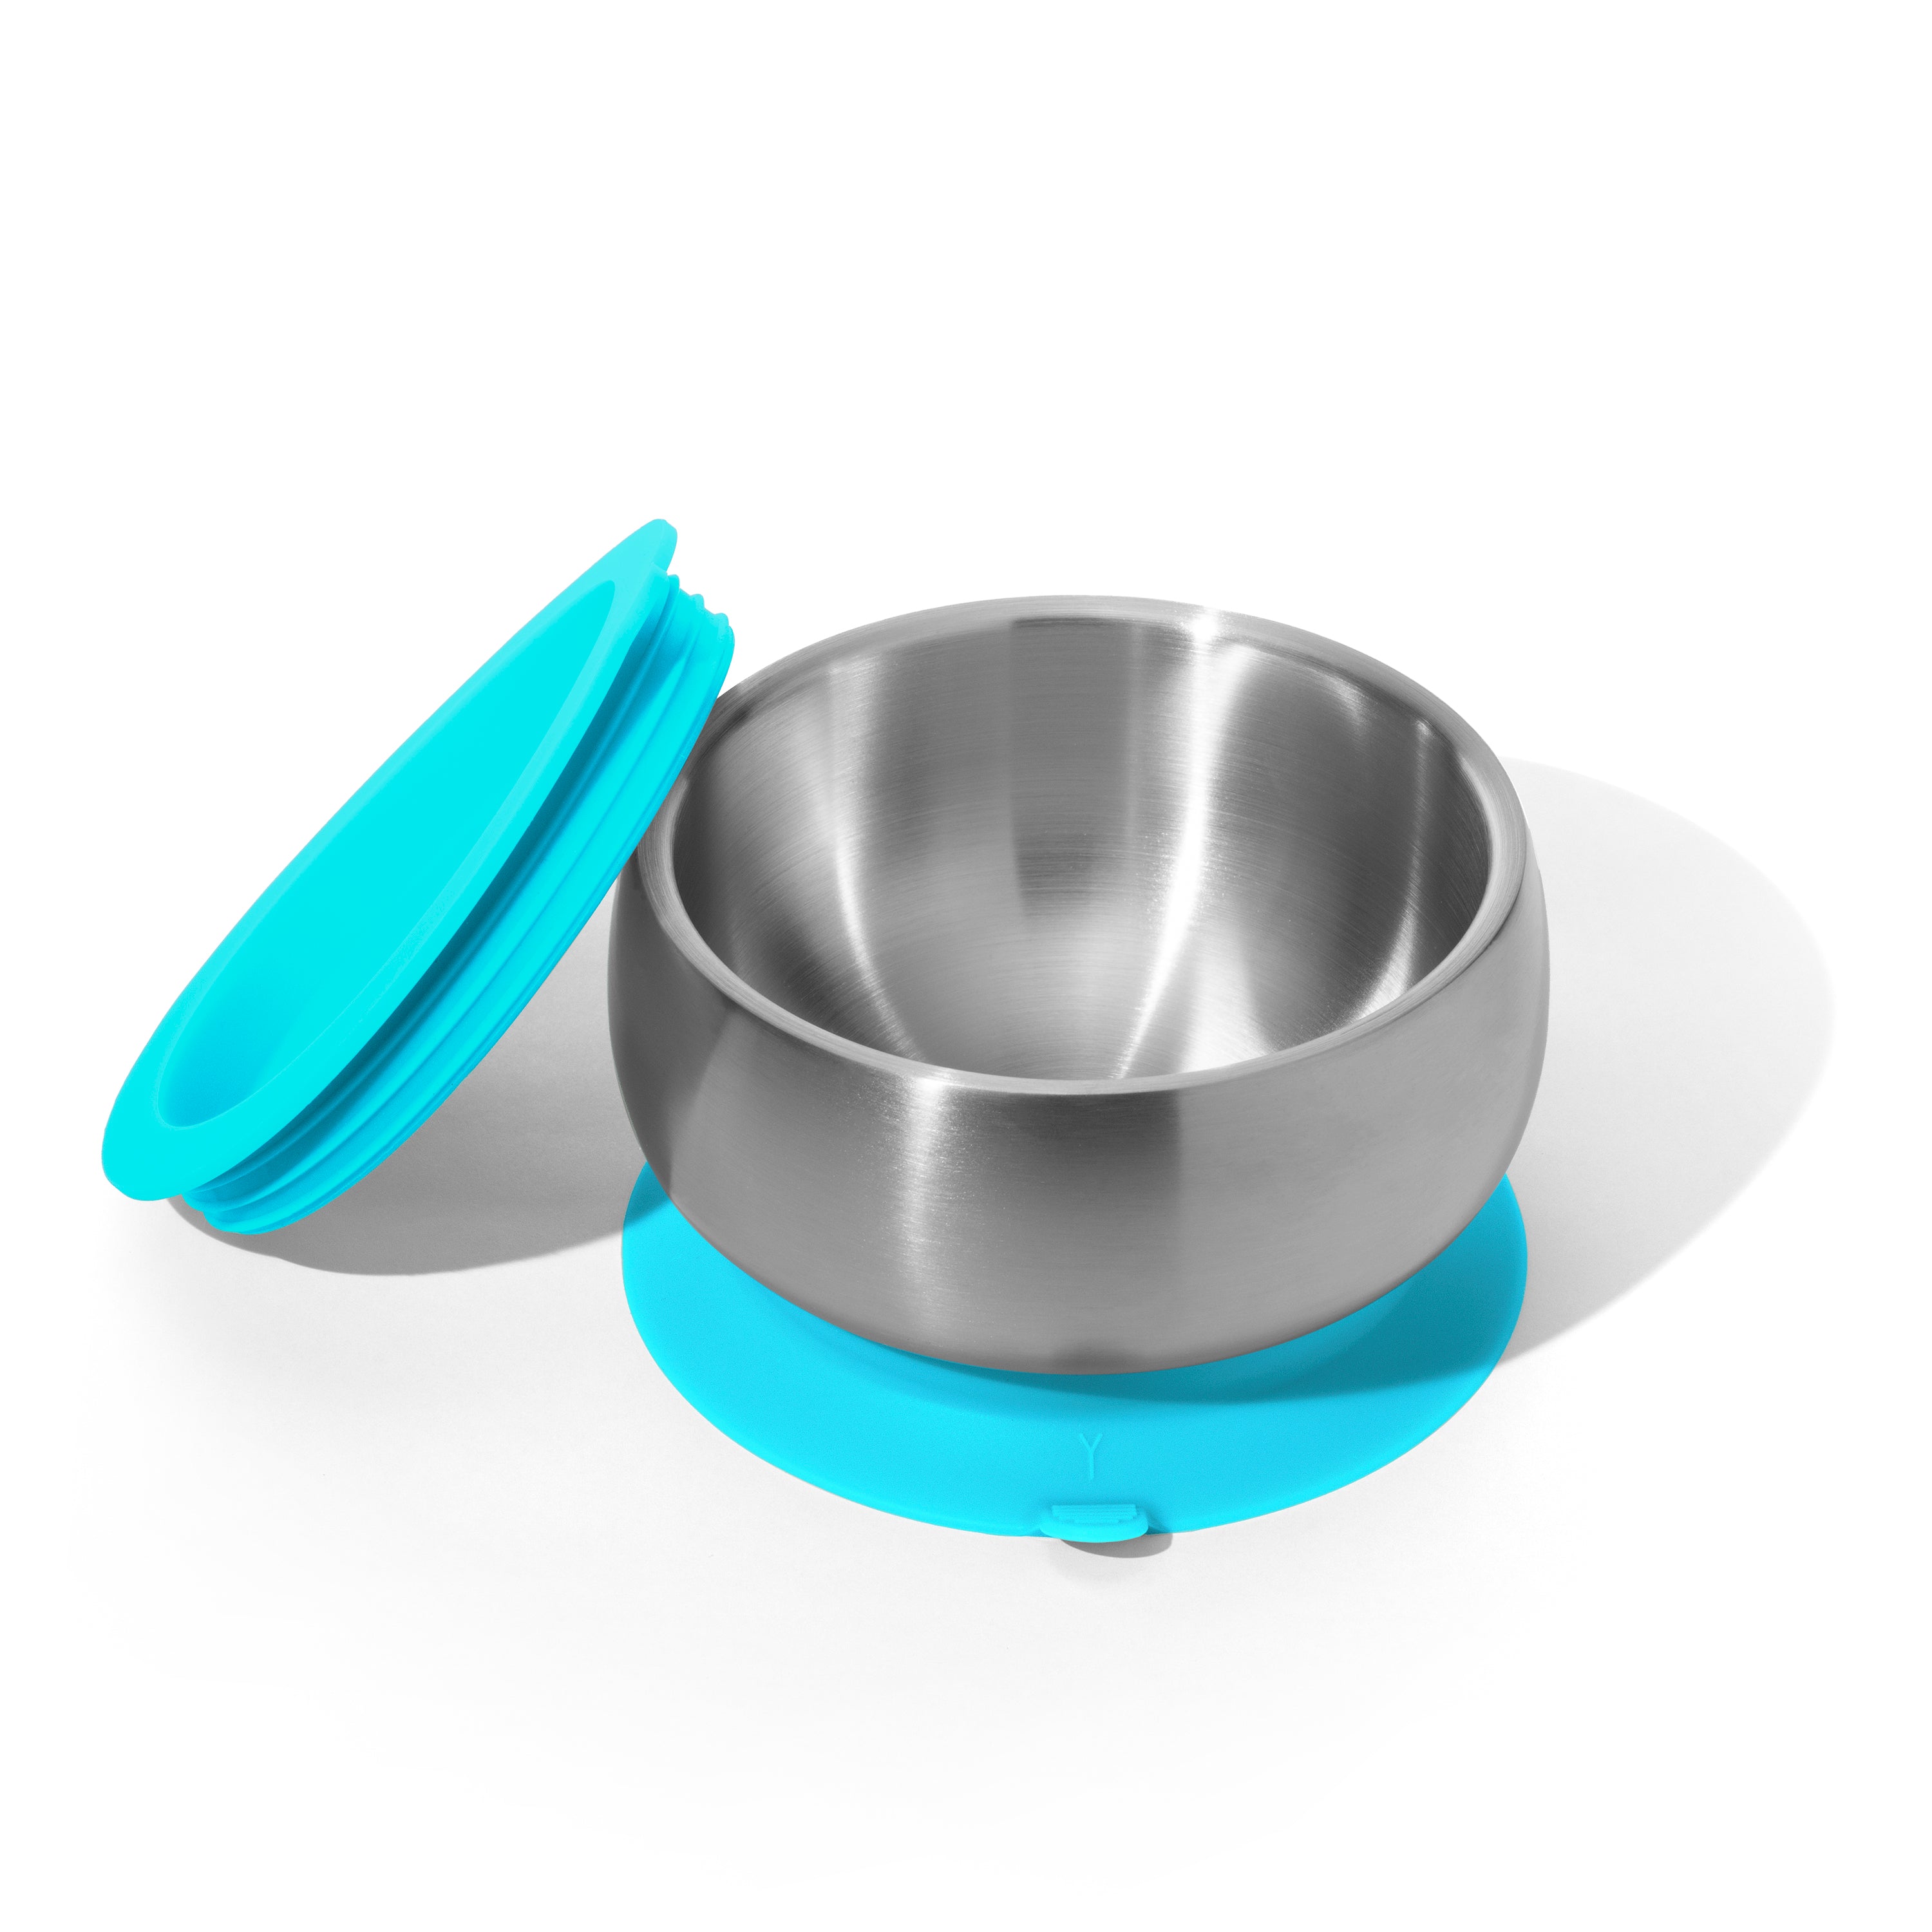 Avanchy Stainless Steel Baby Bowl With Lid - Blue